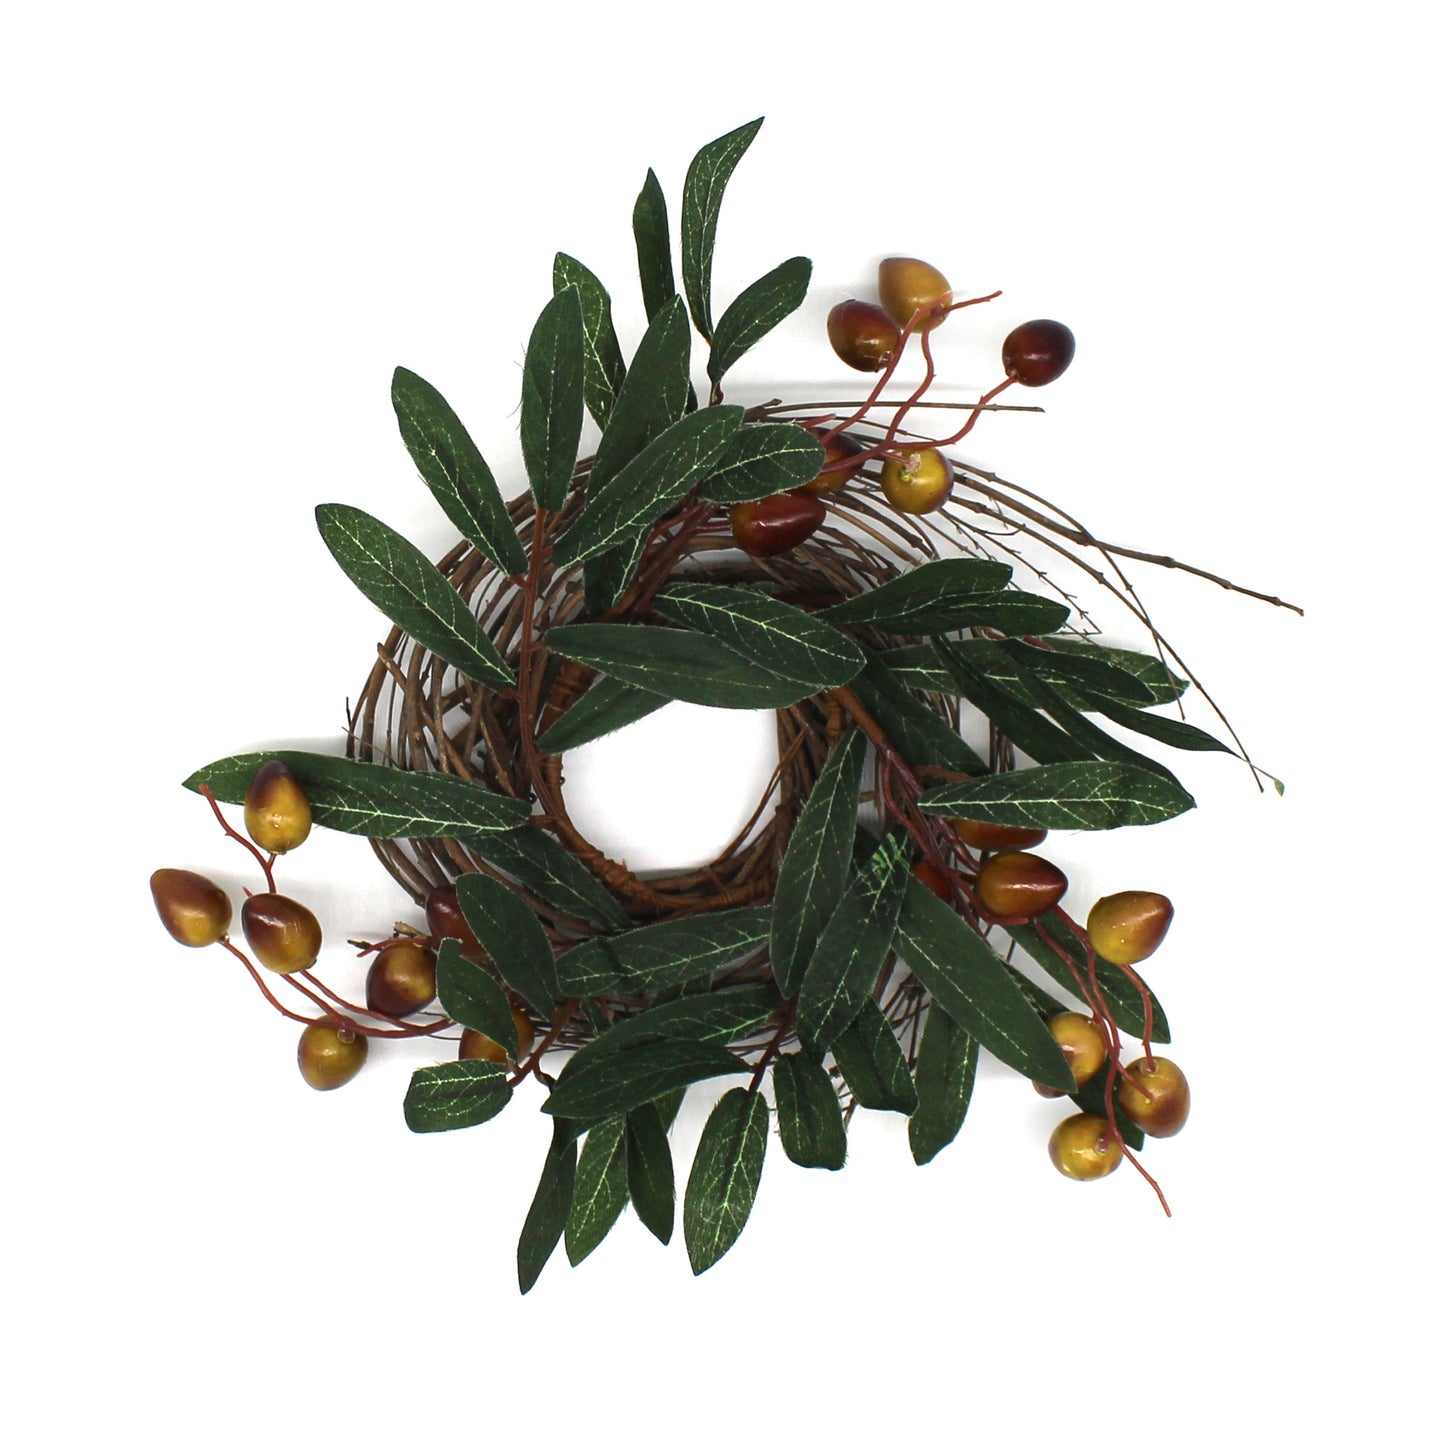 CVHOMEDECO. Rustic Country Artificial Olive branch and Twig Wreath, Year Round Full Green Wreath for Indoor or Outdoor Display, 9 Inch